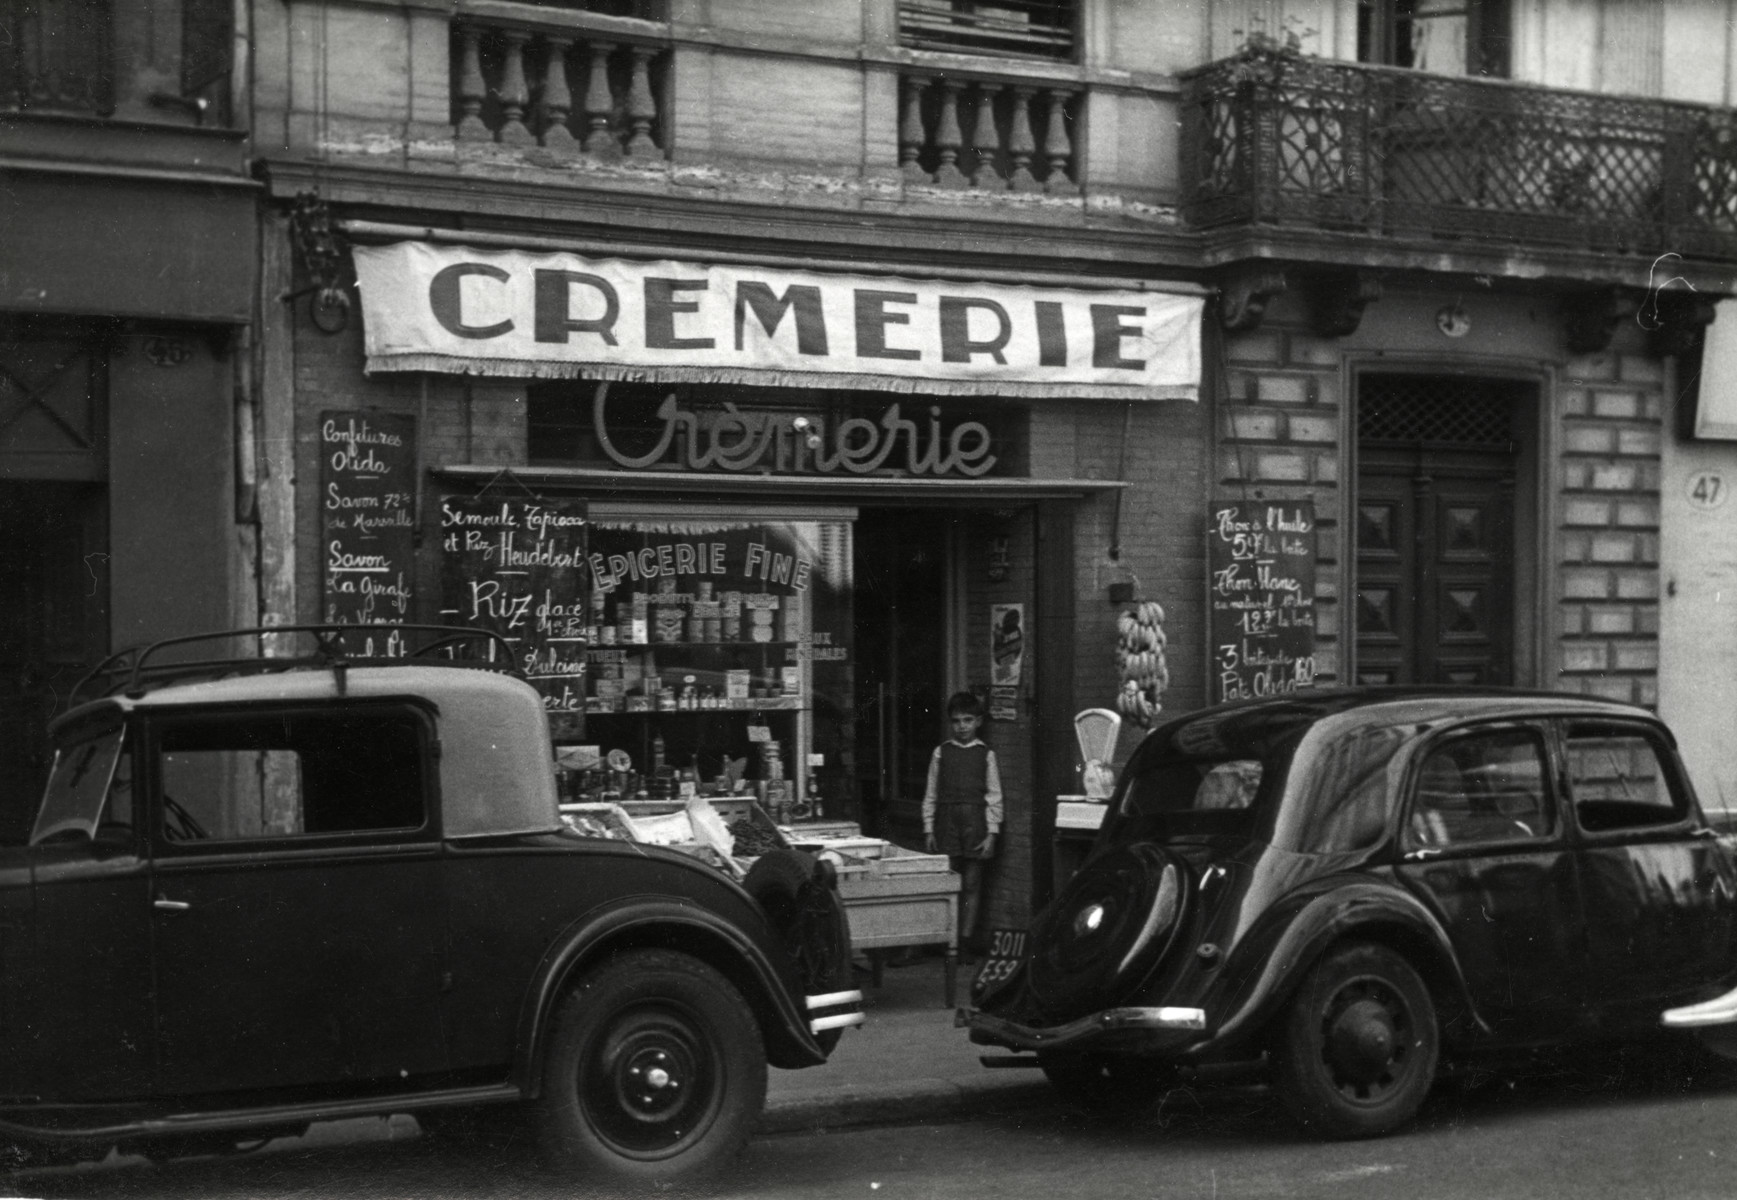 View of two automobiles parked outside the Cheraki's grocery store in Toulouse, France.